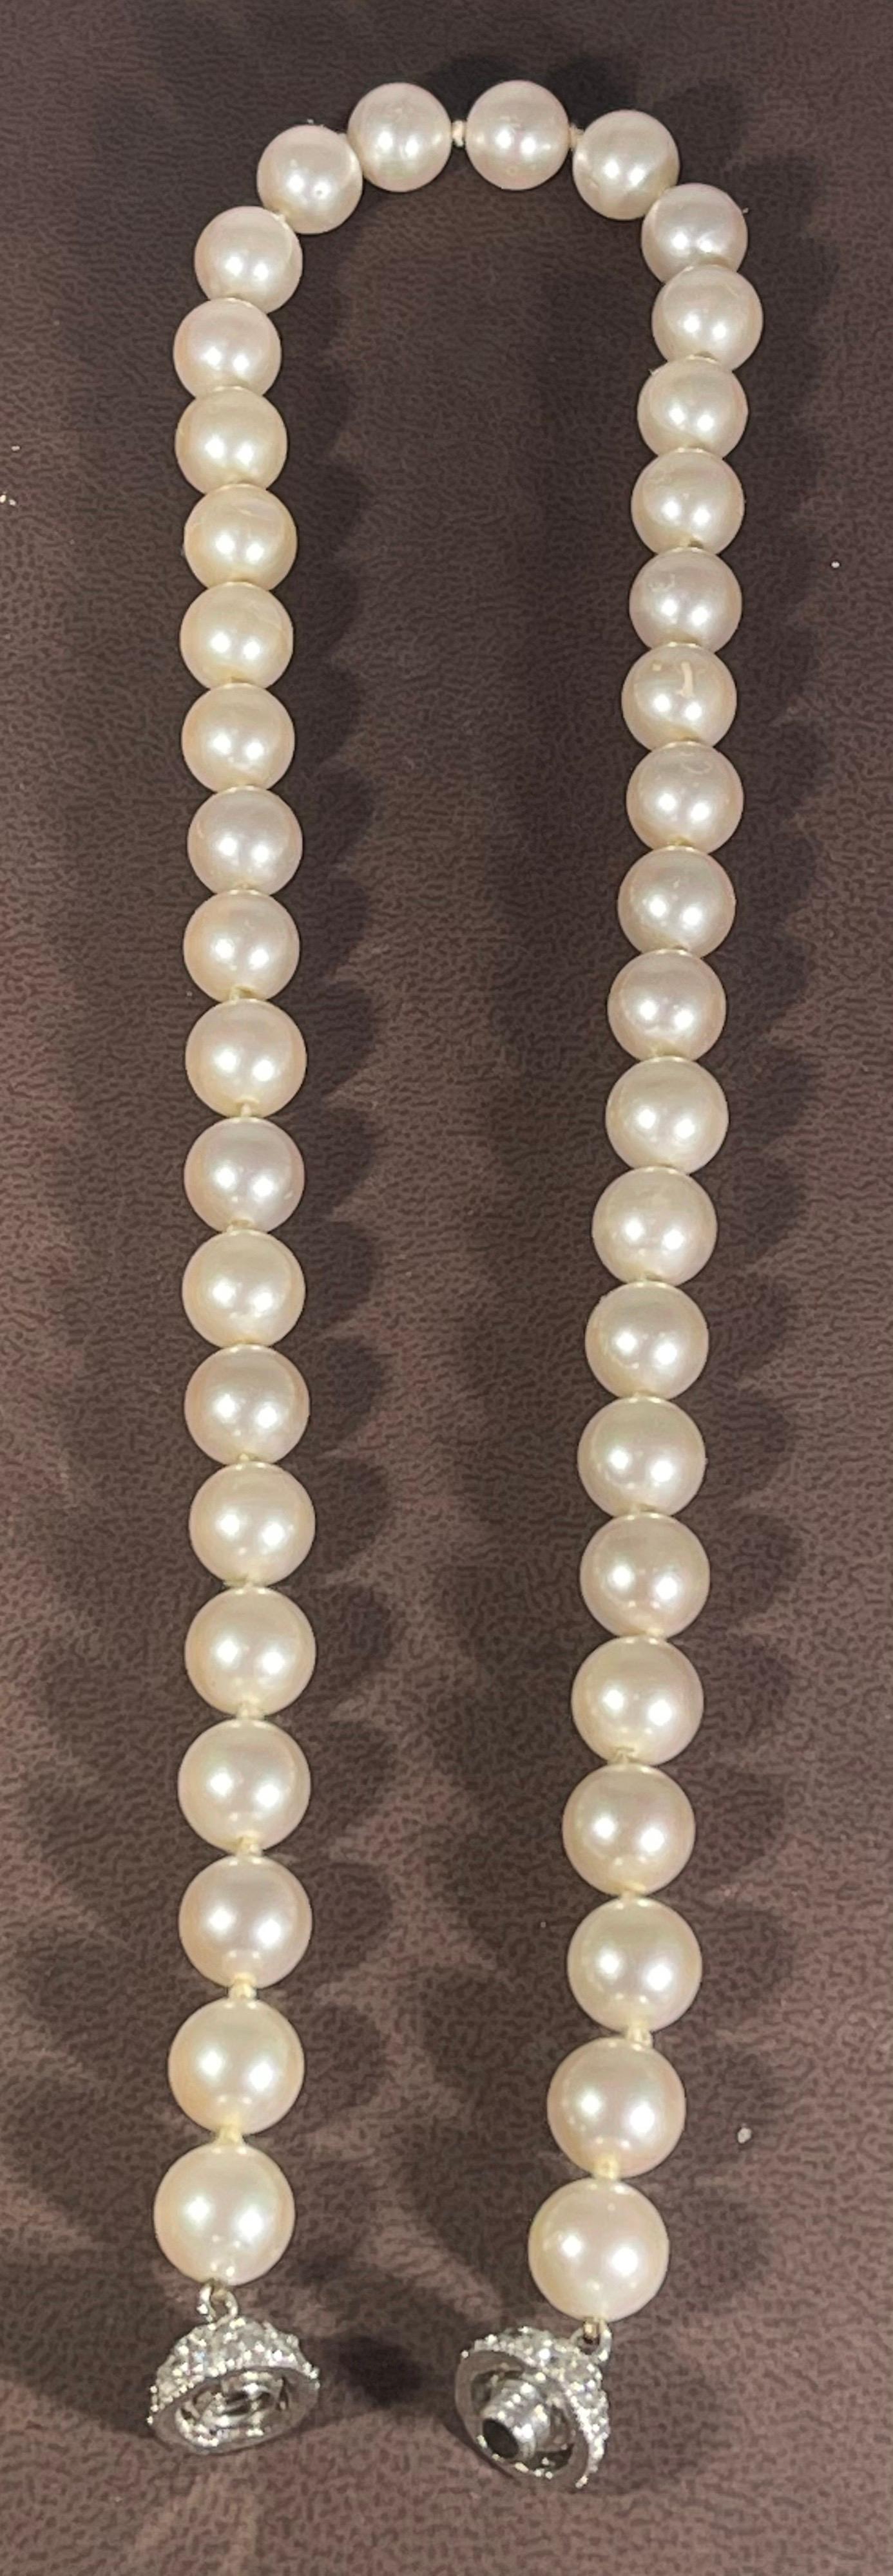 Round Cut 41 Round Akoya Pearls Strand Necklace Set in Metal Ball Clasp For Sale